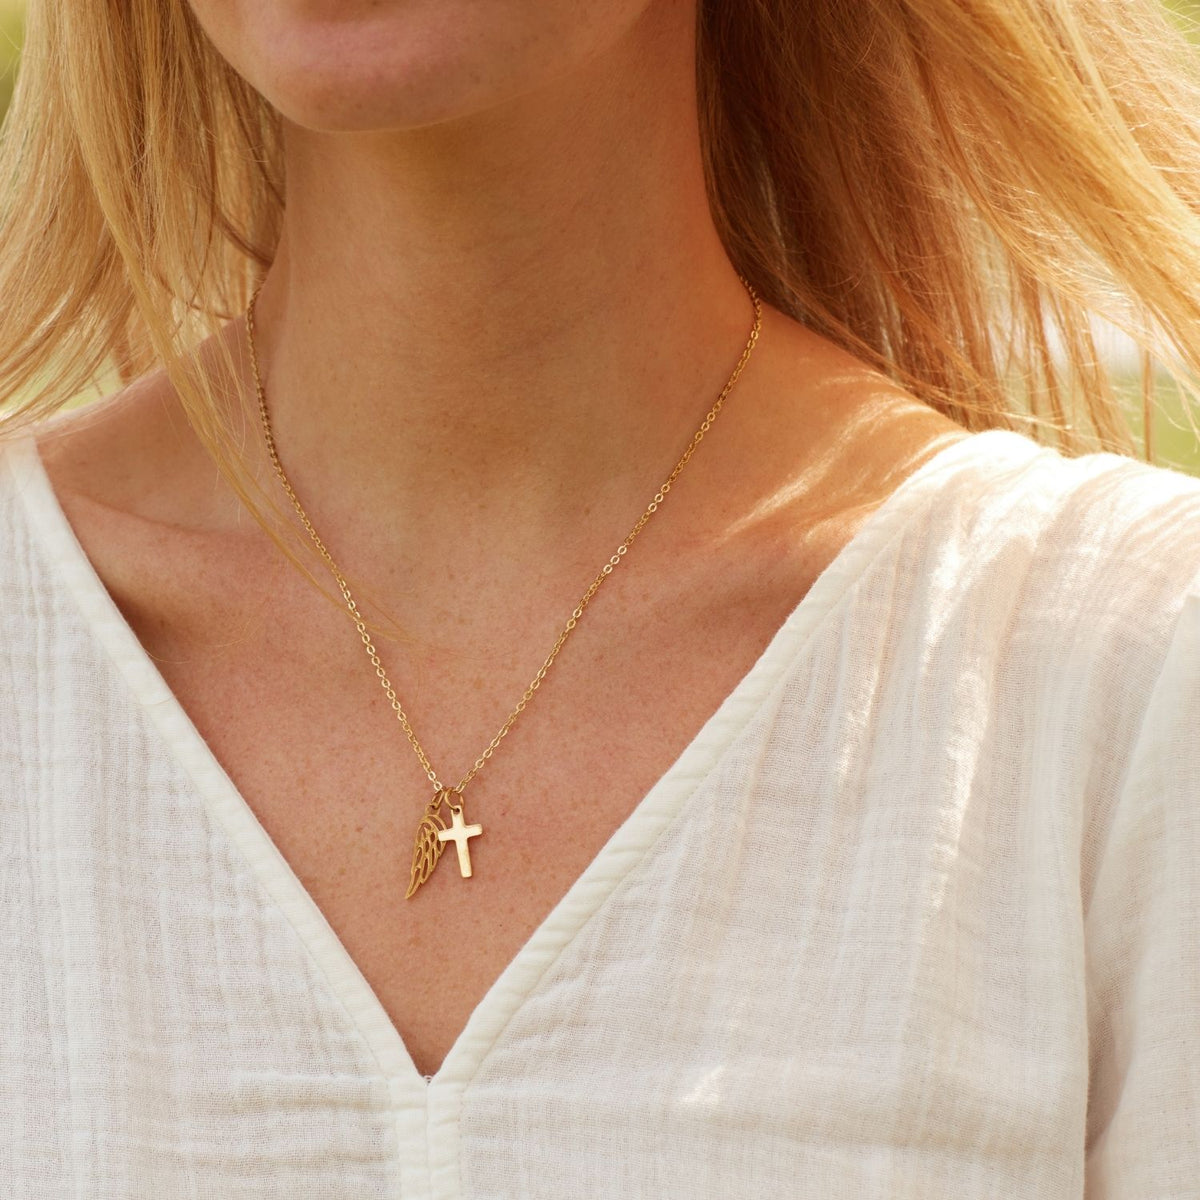 My Aunt | Love That&#39;s Never Ending | Cross Necklace